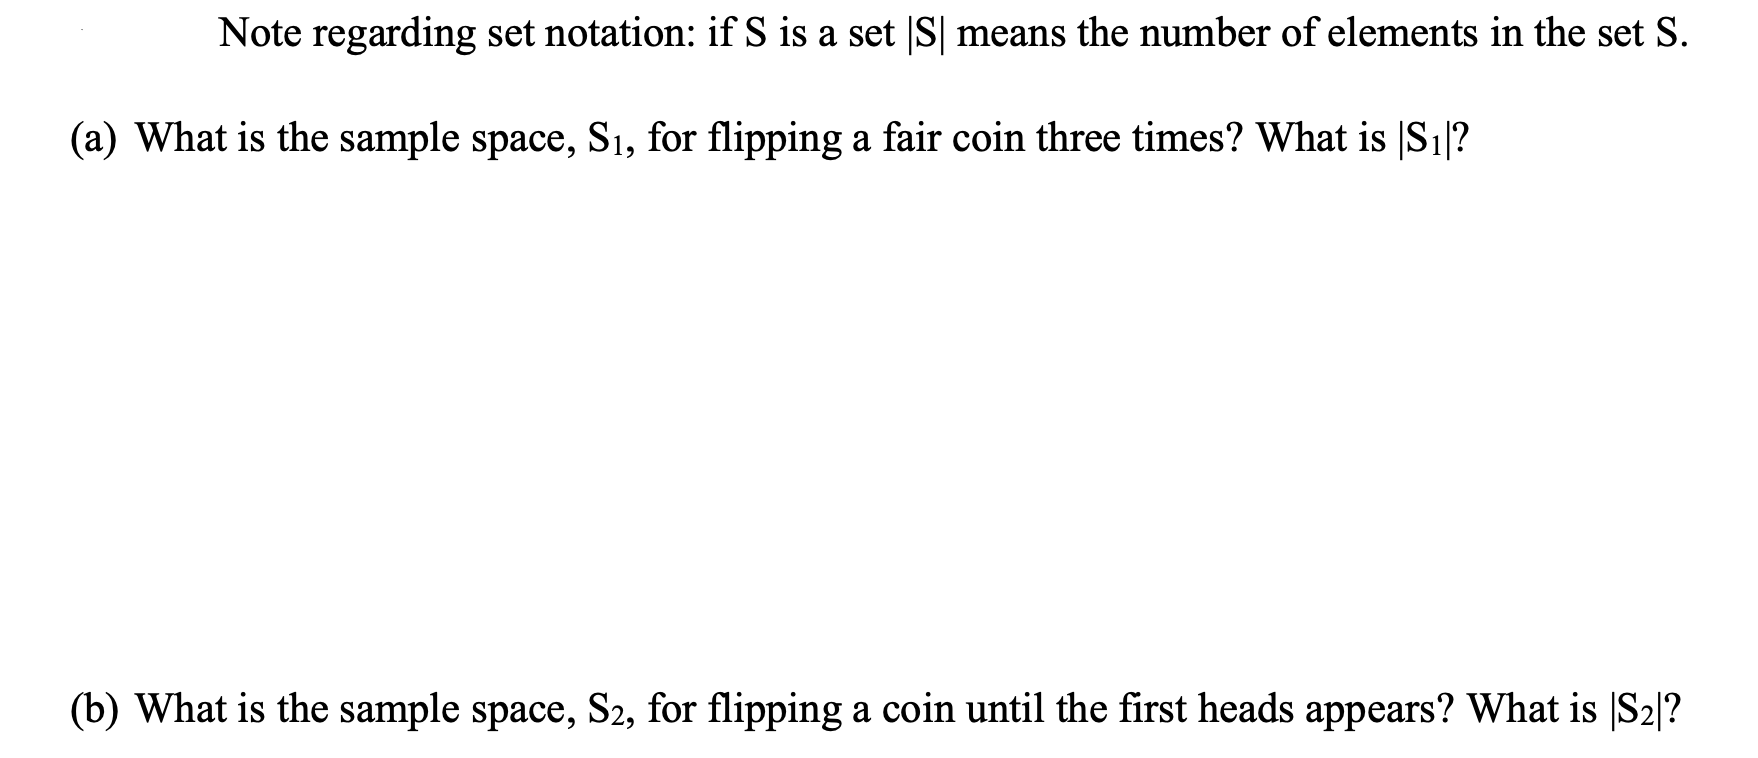 Note regarding set notation: if S is a set |S| means the number of elements in the set S.
(a) What is the sample space, S1, for flipping a fair coin three times? What is |S1|?
(b) What is the sample space, S2, for flipping a coin until the first heads appears? What is |S2|?
